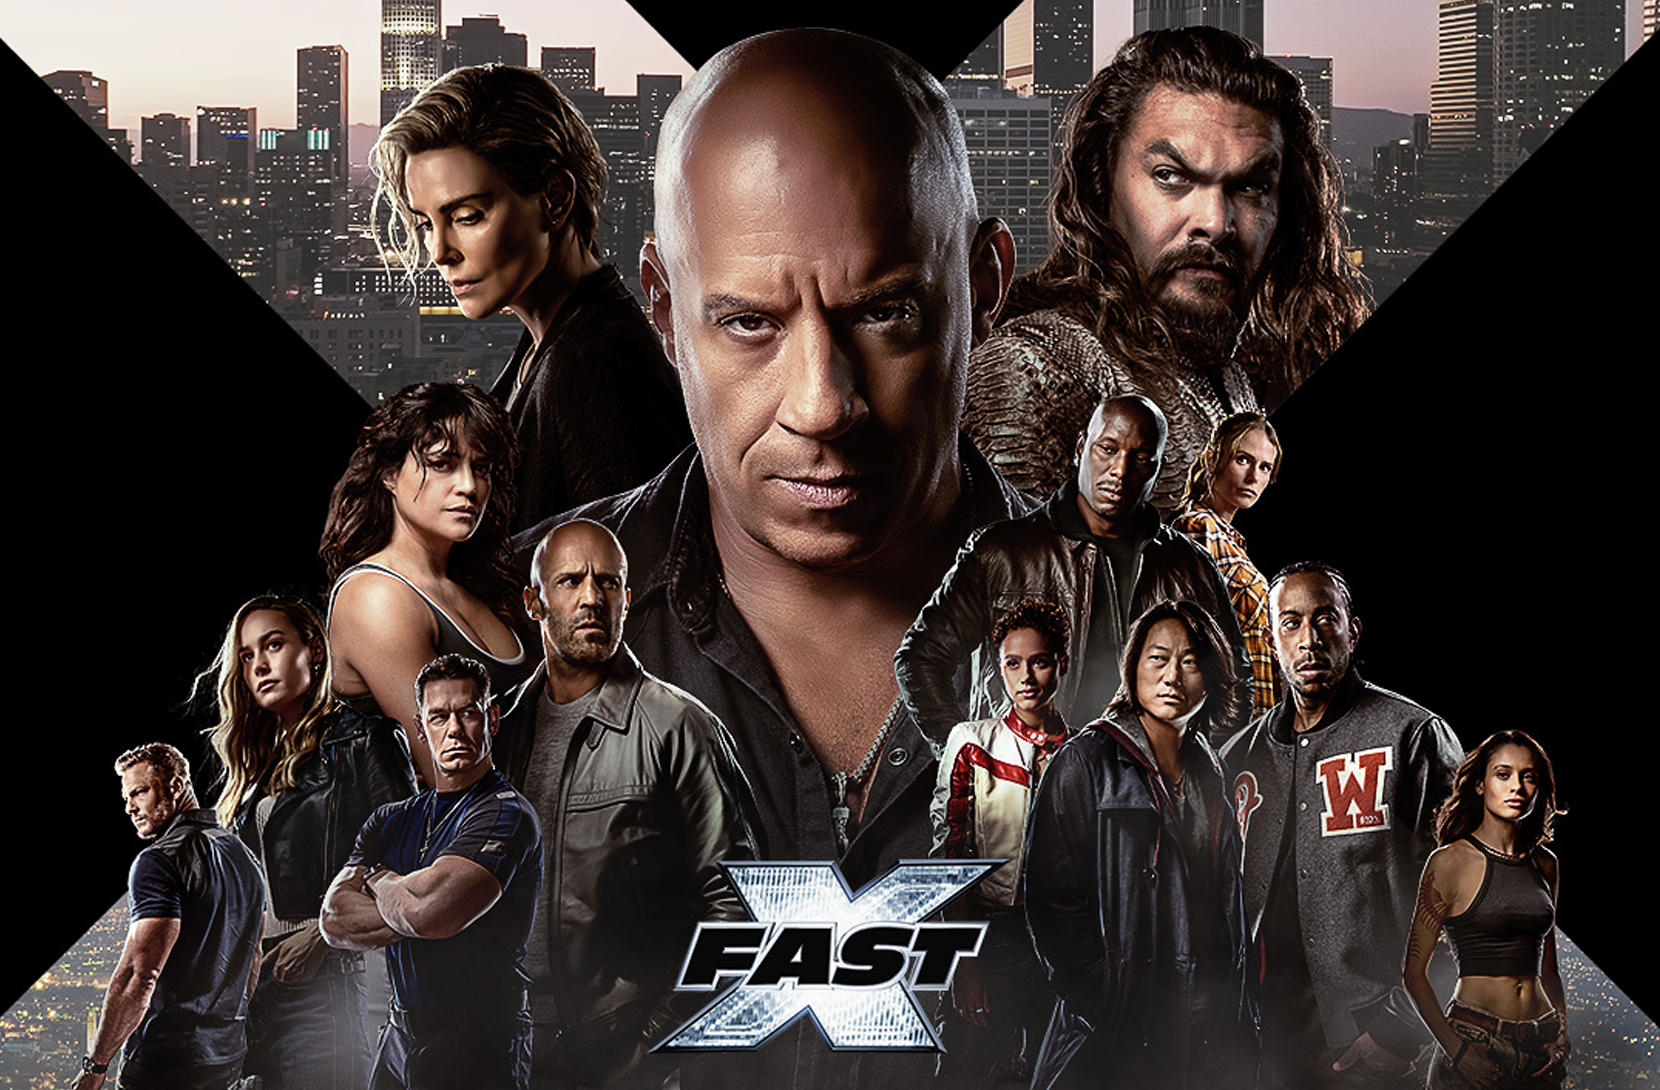 Fast & Furious - 10 Film Collection (inc Hobbs & Shaw) [4K Ultra HD] :  : Movies & TV